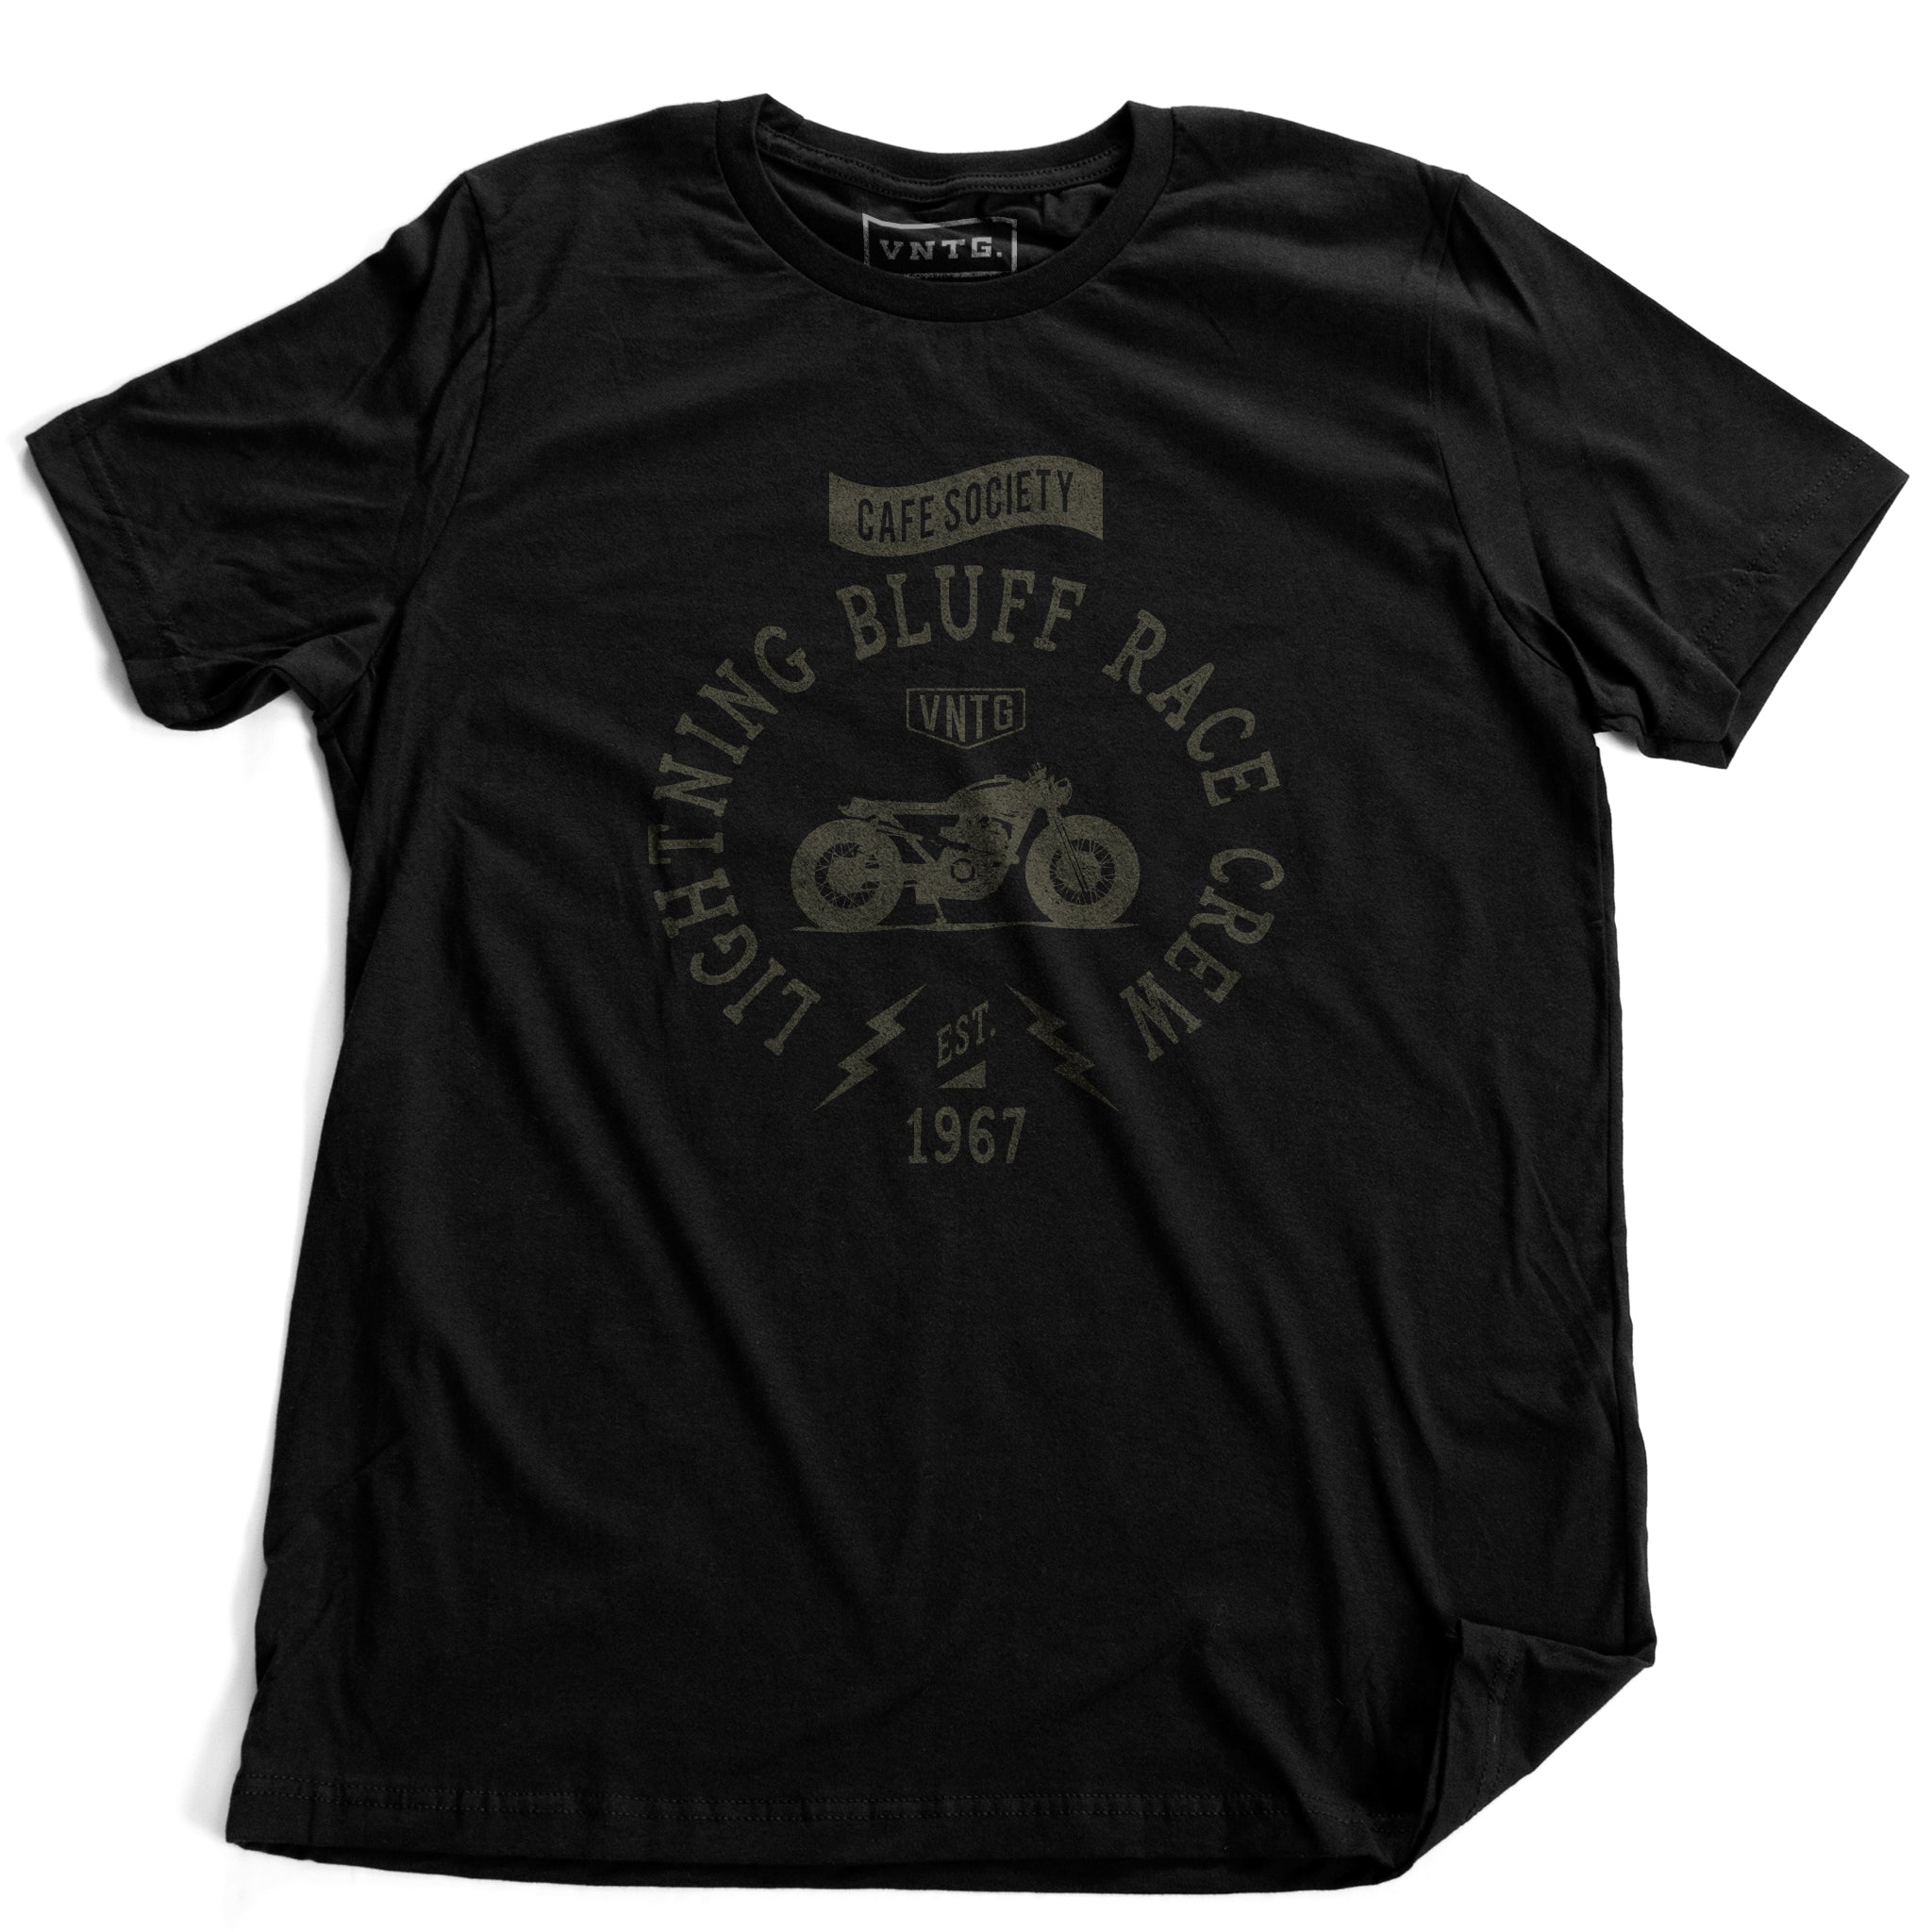 A vintage-inspired retro t-shirt for a fictitious motorcycle race crew. For the café racer genre of vintage motorcycles, this shirt reads “Lightning Bluff Race Crew, established 1967” in Black, by fashion brand VNTG., for wolfsaint.net 